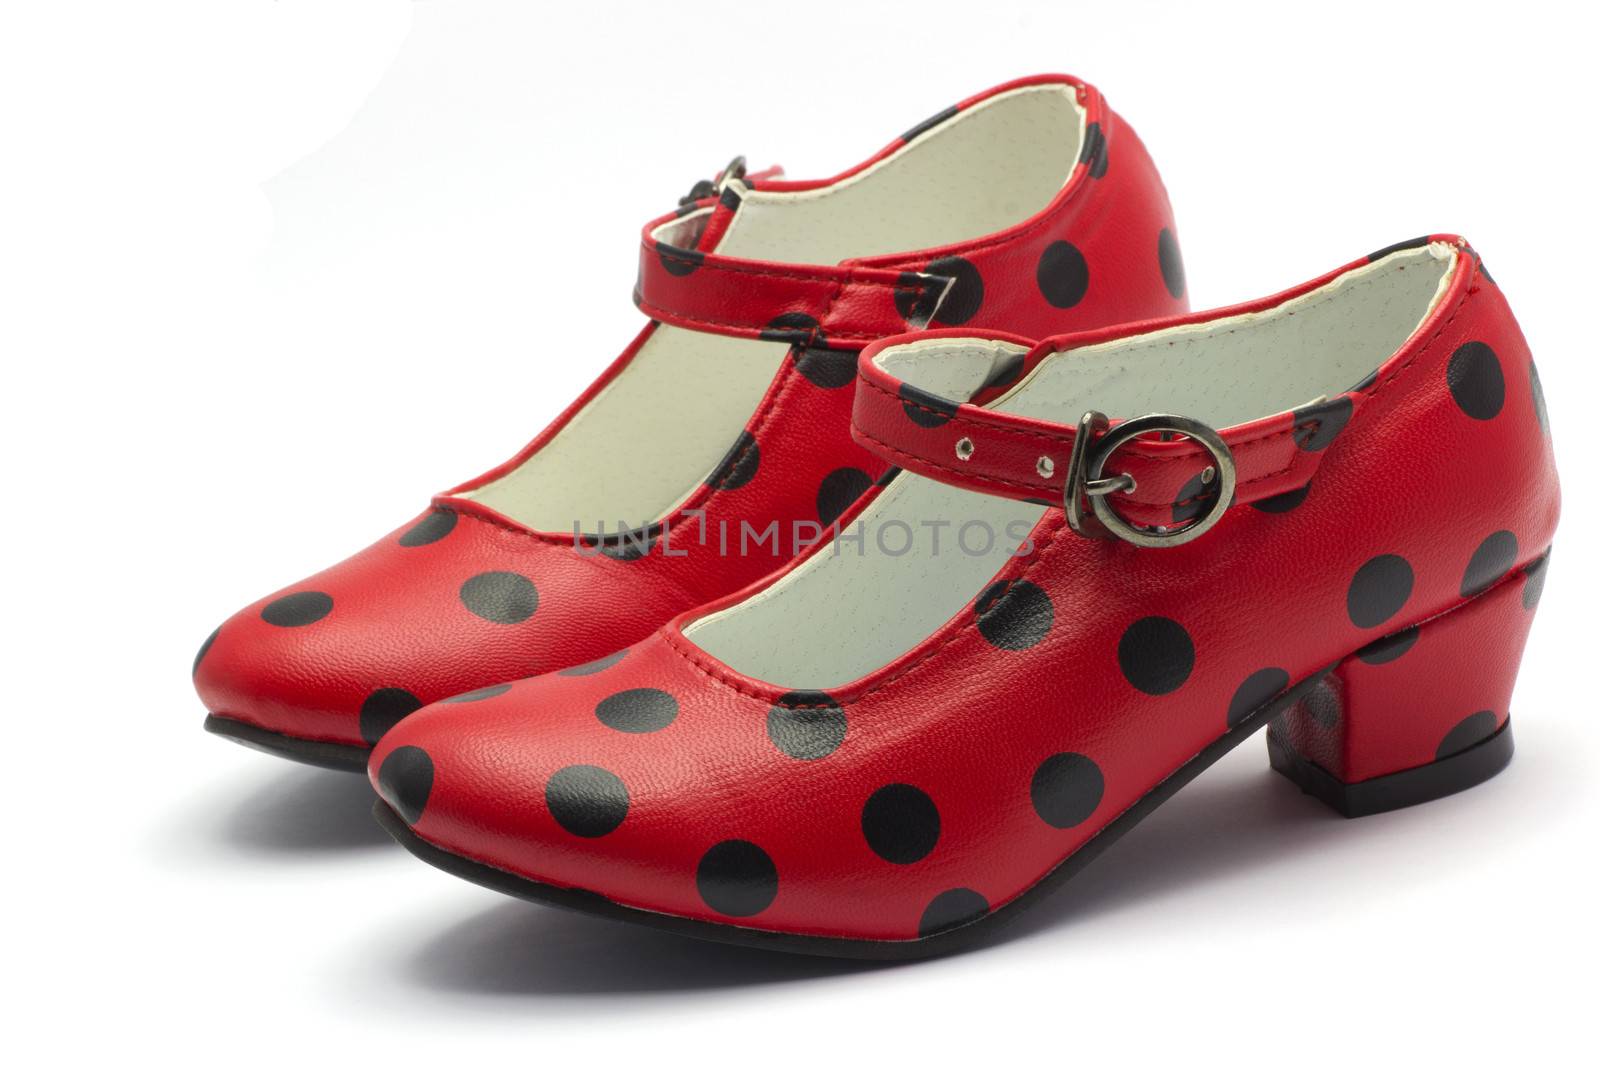 Pair of Sevillian flamenco dancing shoes.
Red shoes with black dots